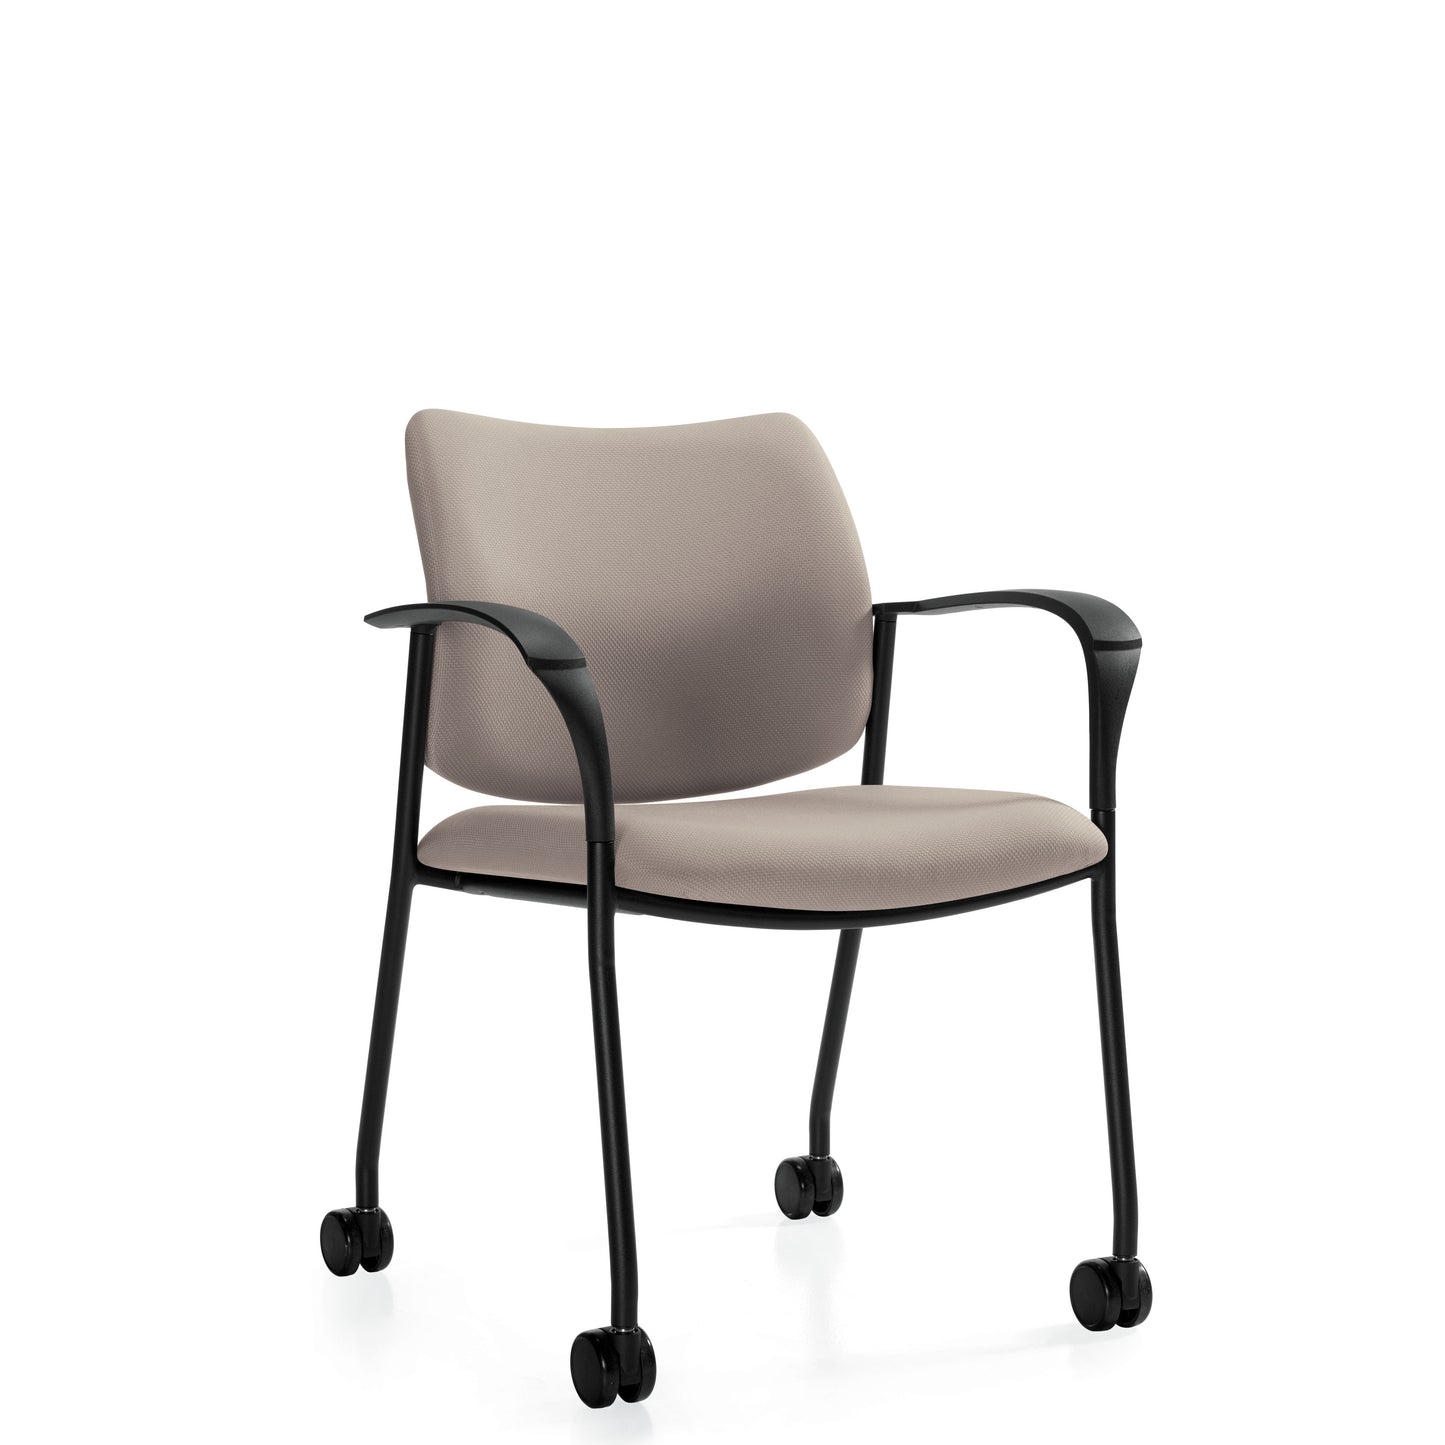 Sidero Armchair with Casters 6900C